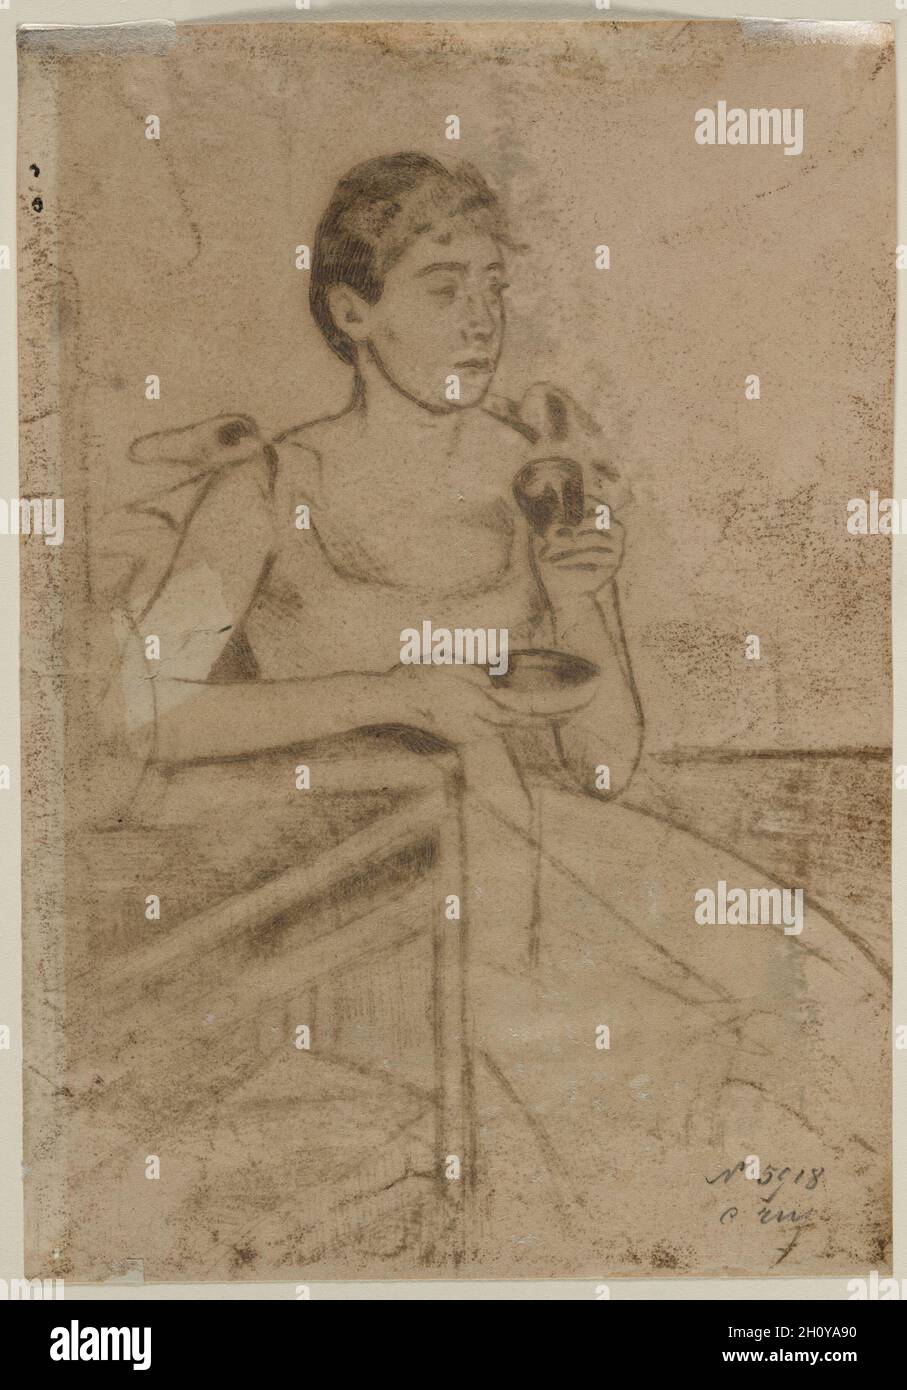 After-Dinner Coffee (verso), c. 1889. Mary Cassatt (American, 1844-1926). Transferred soft (etching) ground; sheet: 20 x 14 cm (7 7/8 x 5 1/2 in.).  Cassatt exhibited prints for the first time in 1880 at the fifth Impressionist exhibition. As the decade progressed, she continued to show her graphic work alongside pastels and paintings. In the spring of 1890, at the Deuxième Exposition de Peintres-Graveurs, she showed a group of drypoints, remarkable in their delicacy and precision, as well as a group of prints made with a combination of aquatint and softground etching that appeared quickly dra Stock Photo